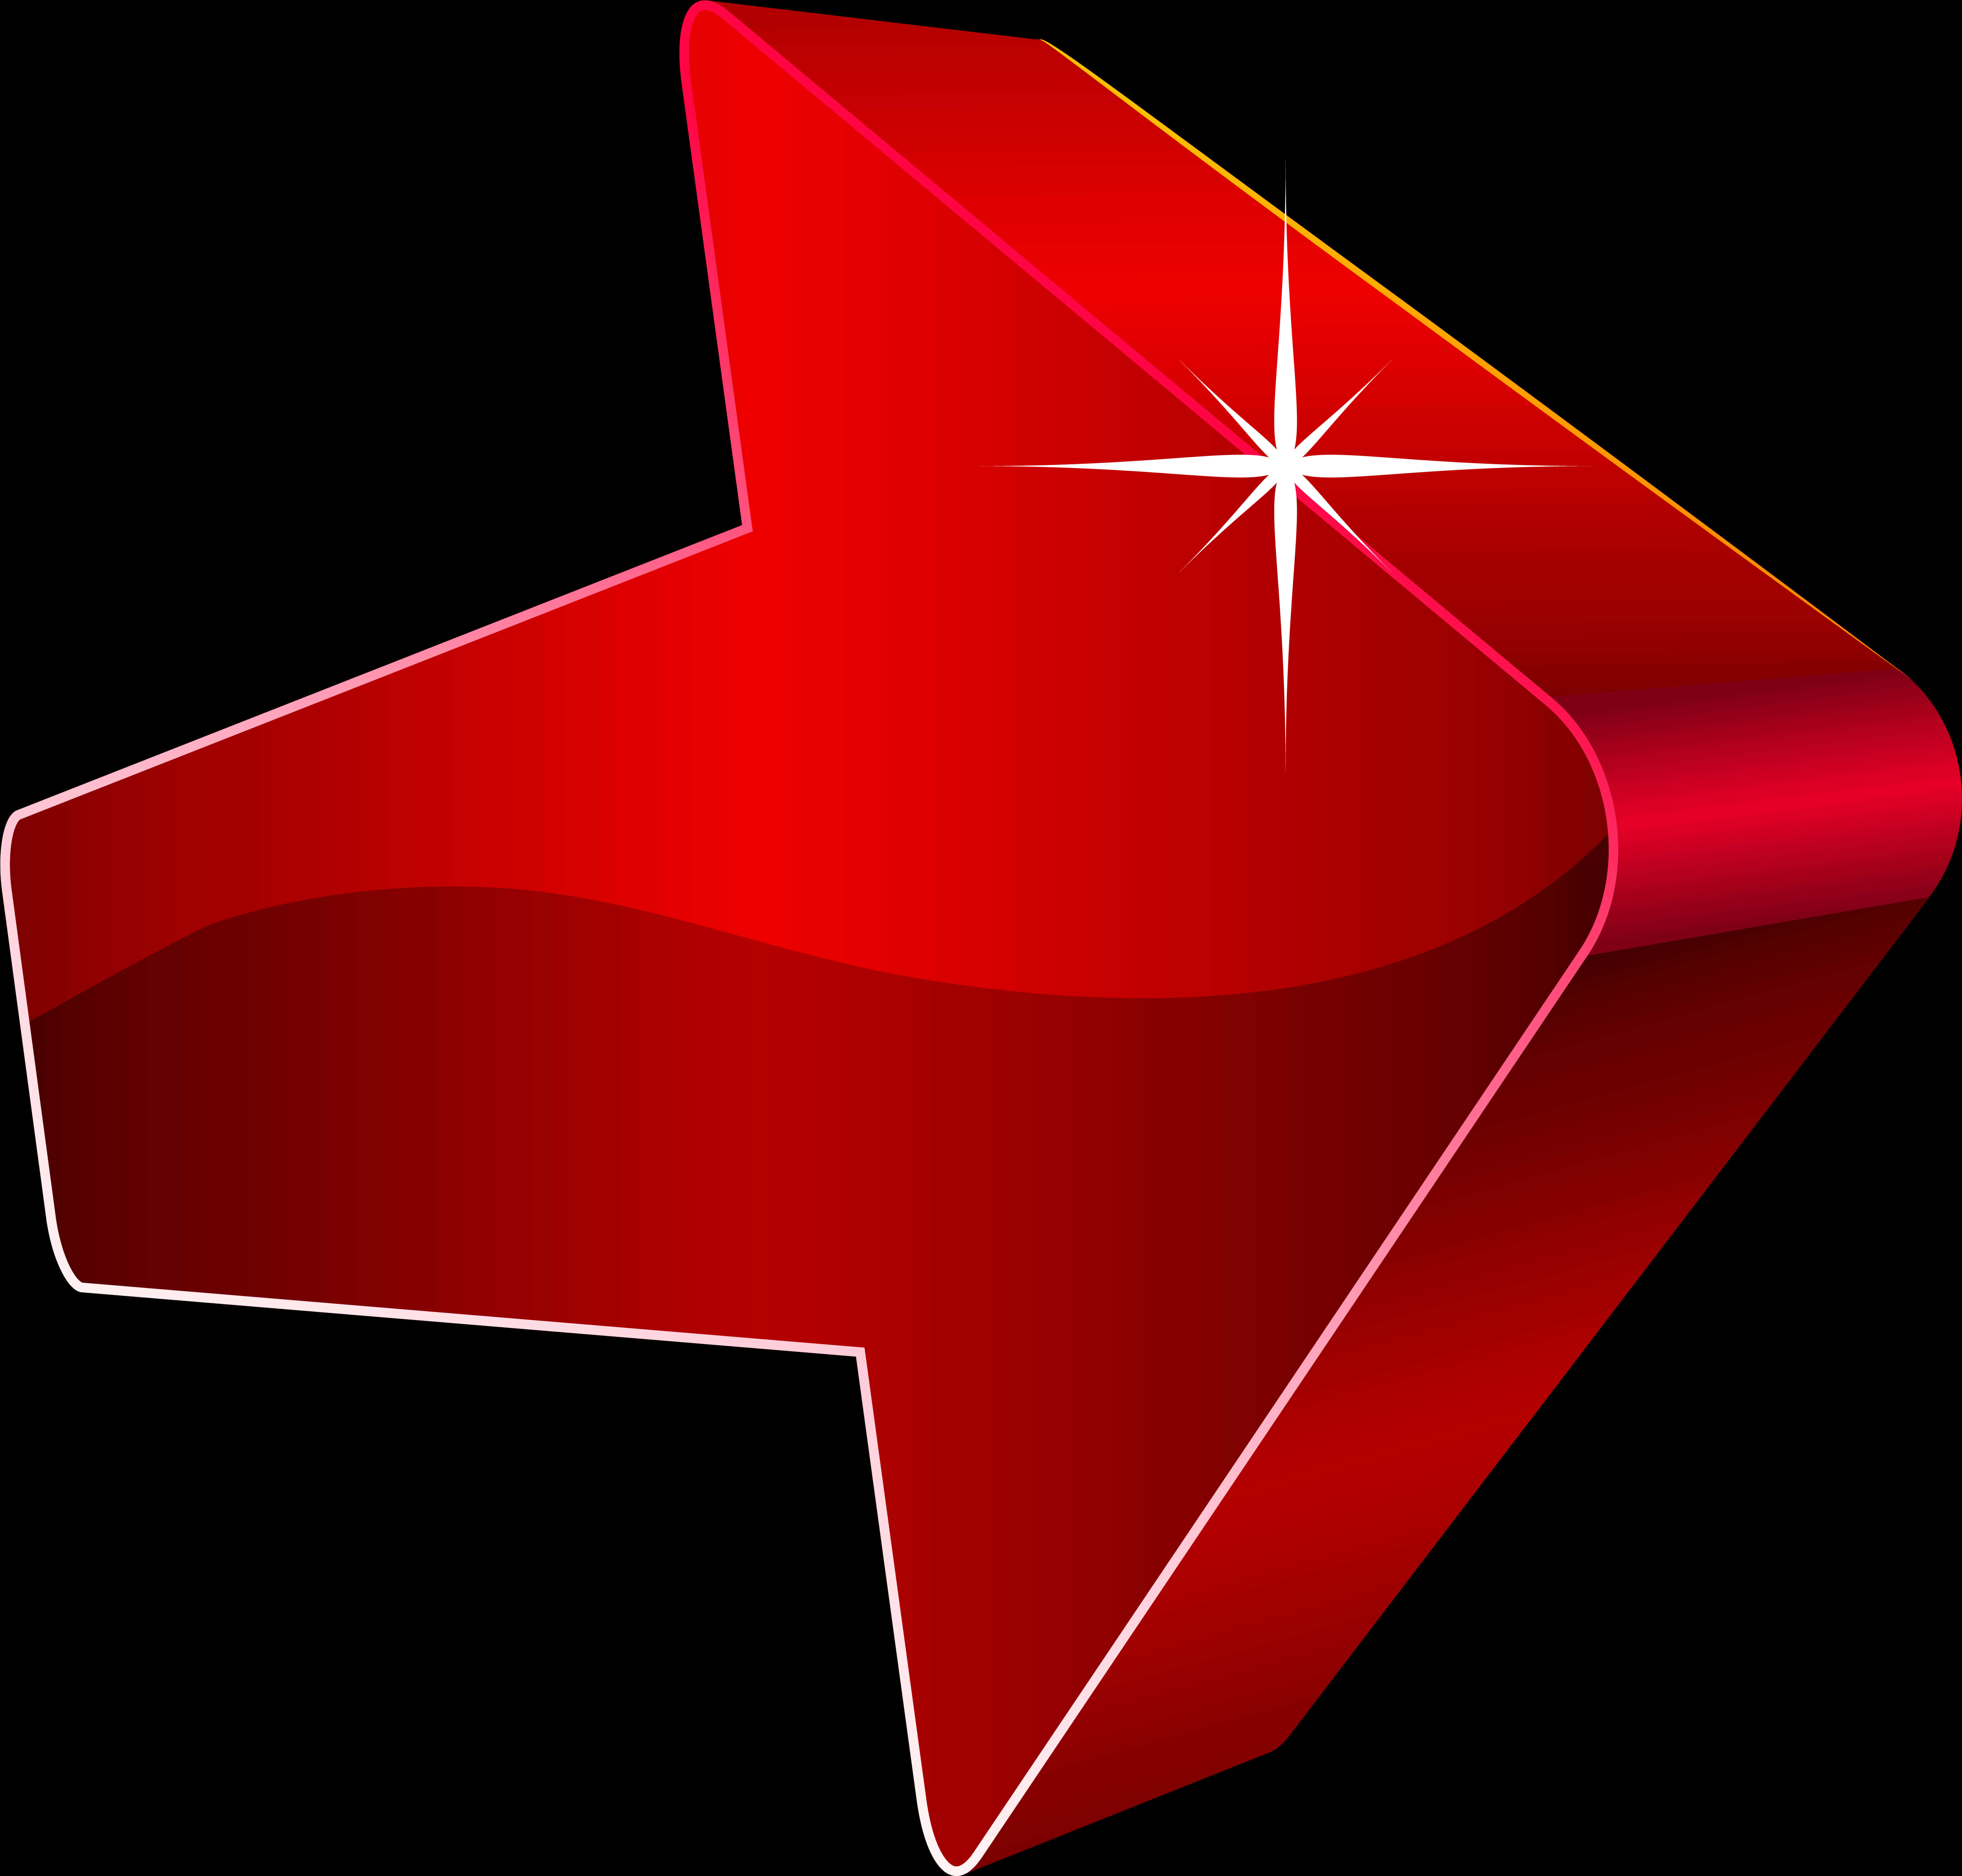 Red Arrow Icon Glossy Finish PNG